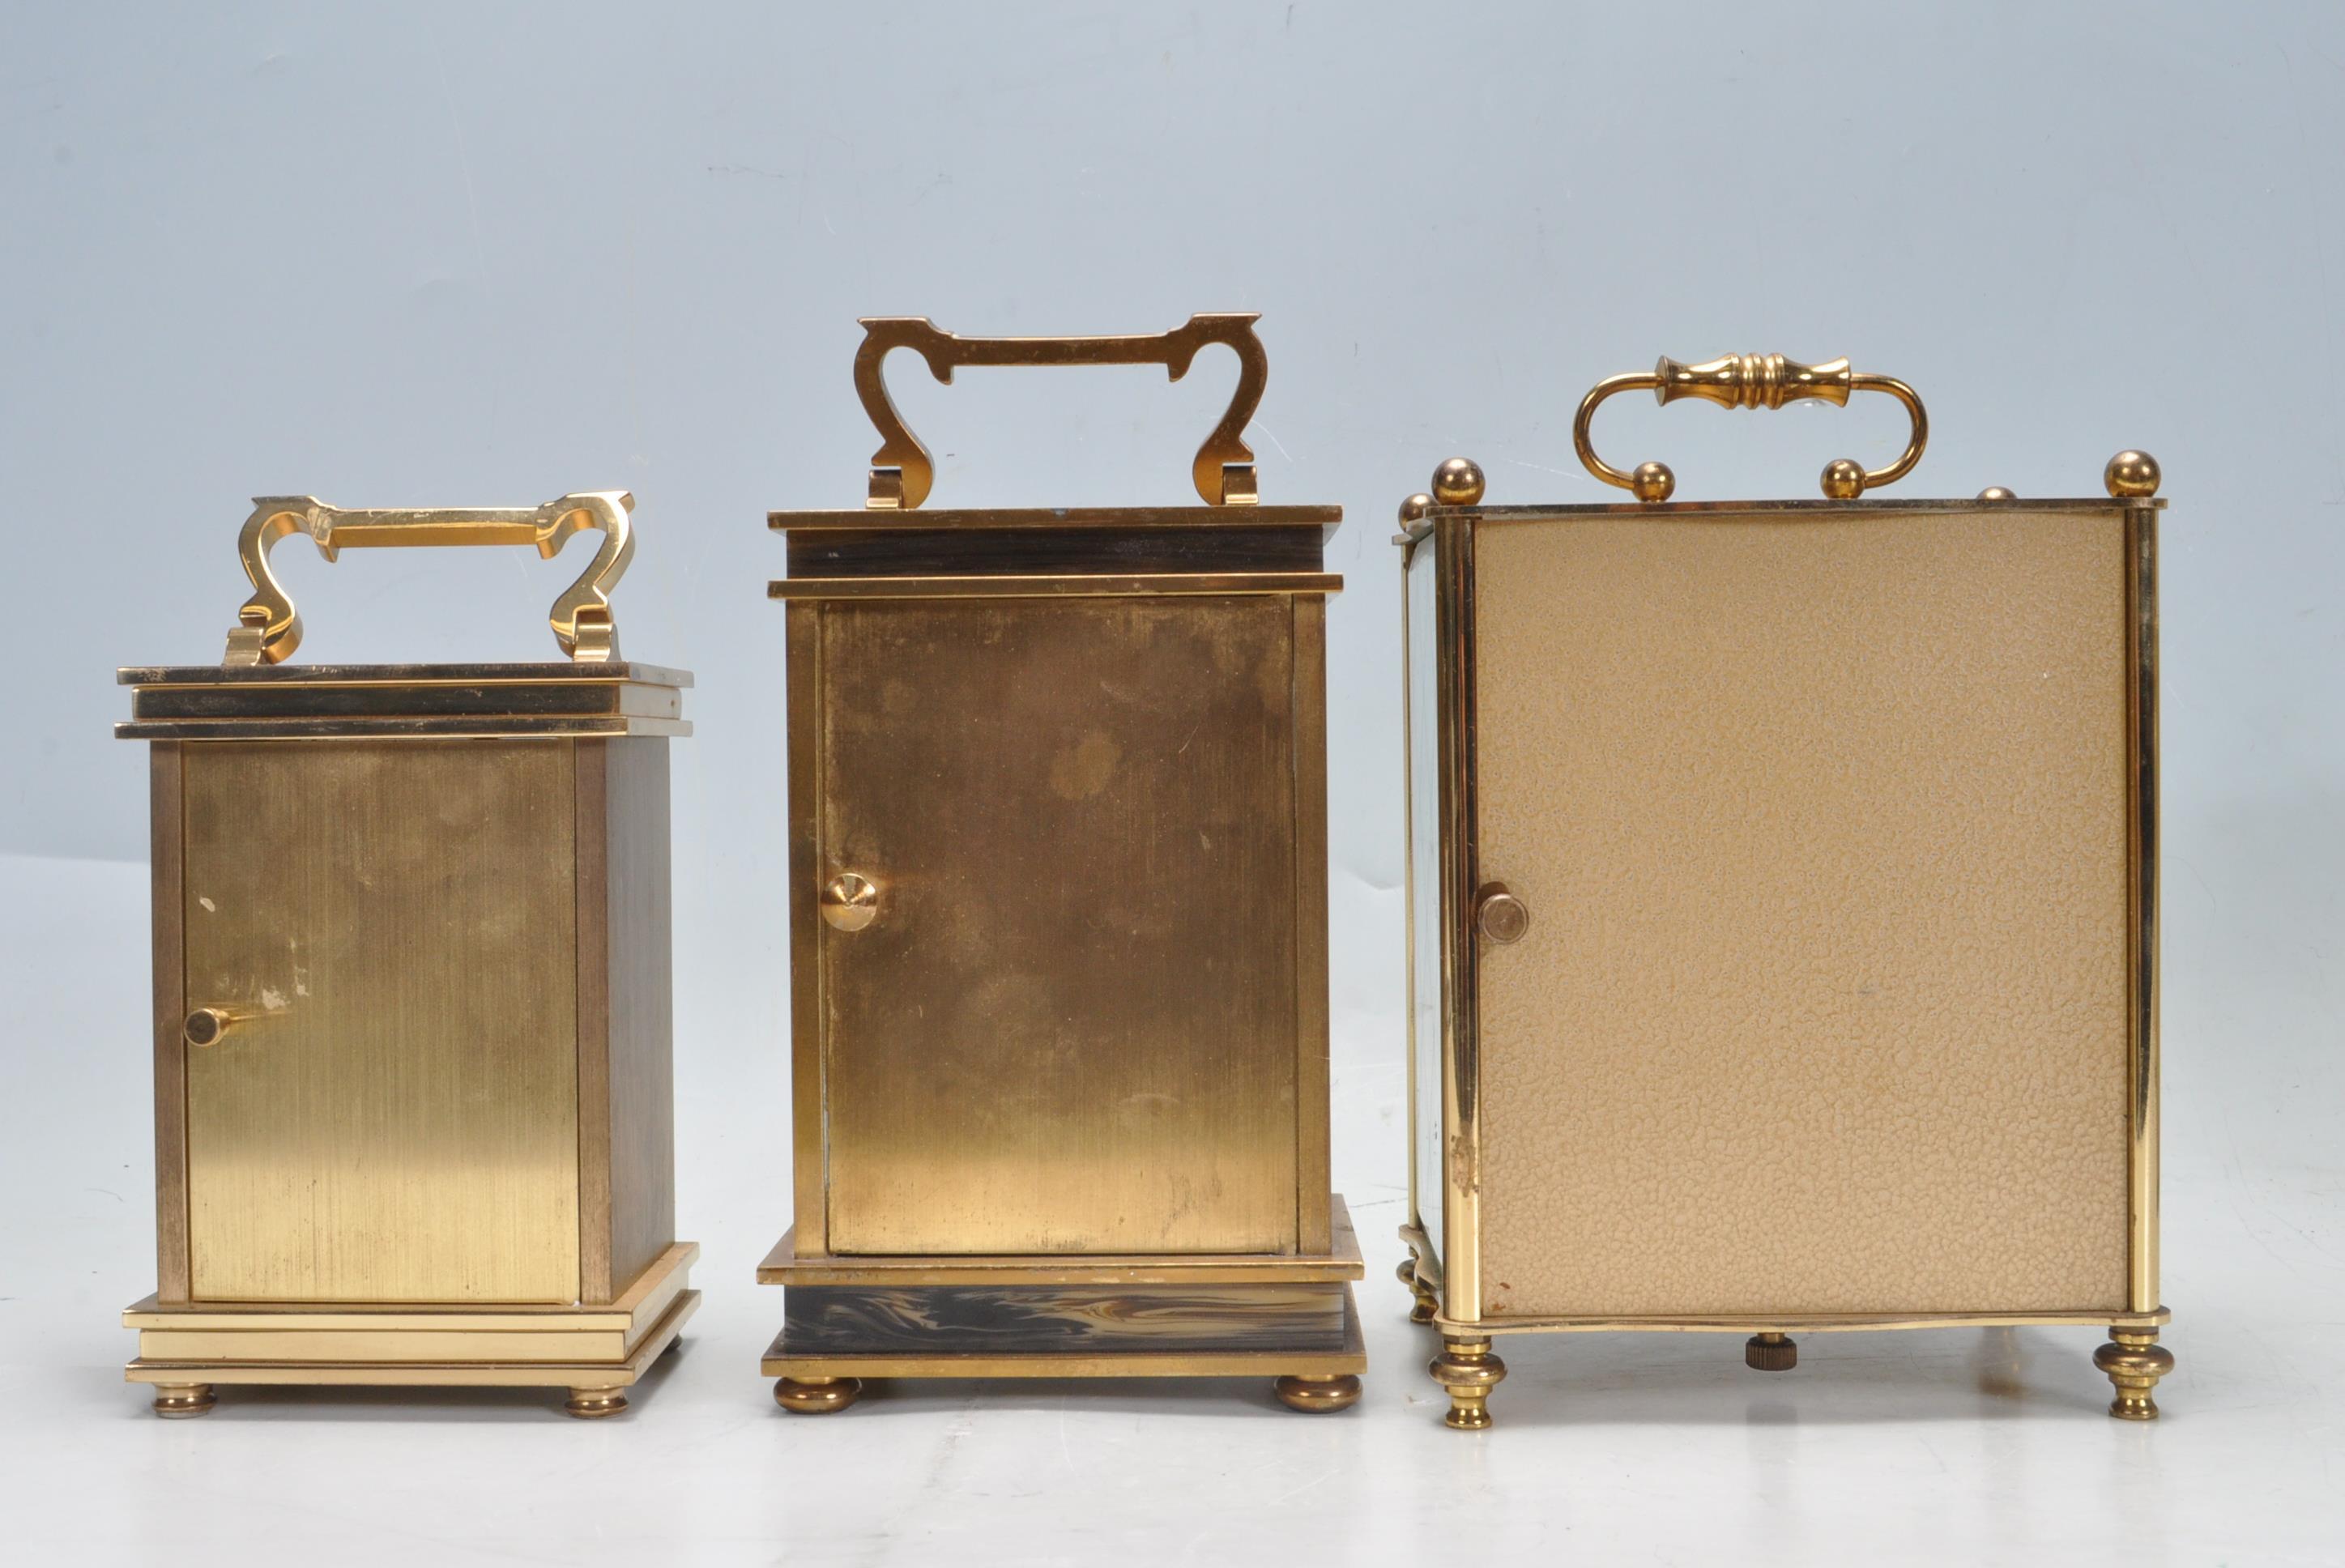 COLLECTION OF VNTAGE 20TH CENTURY CARRIAGE CLOCKS - Image 4 of 6